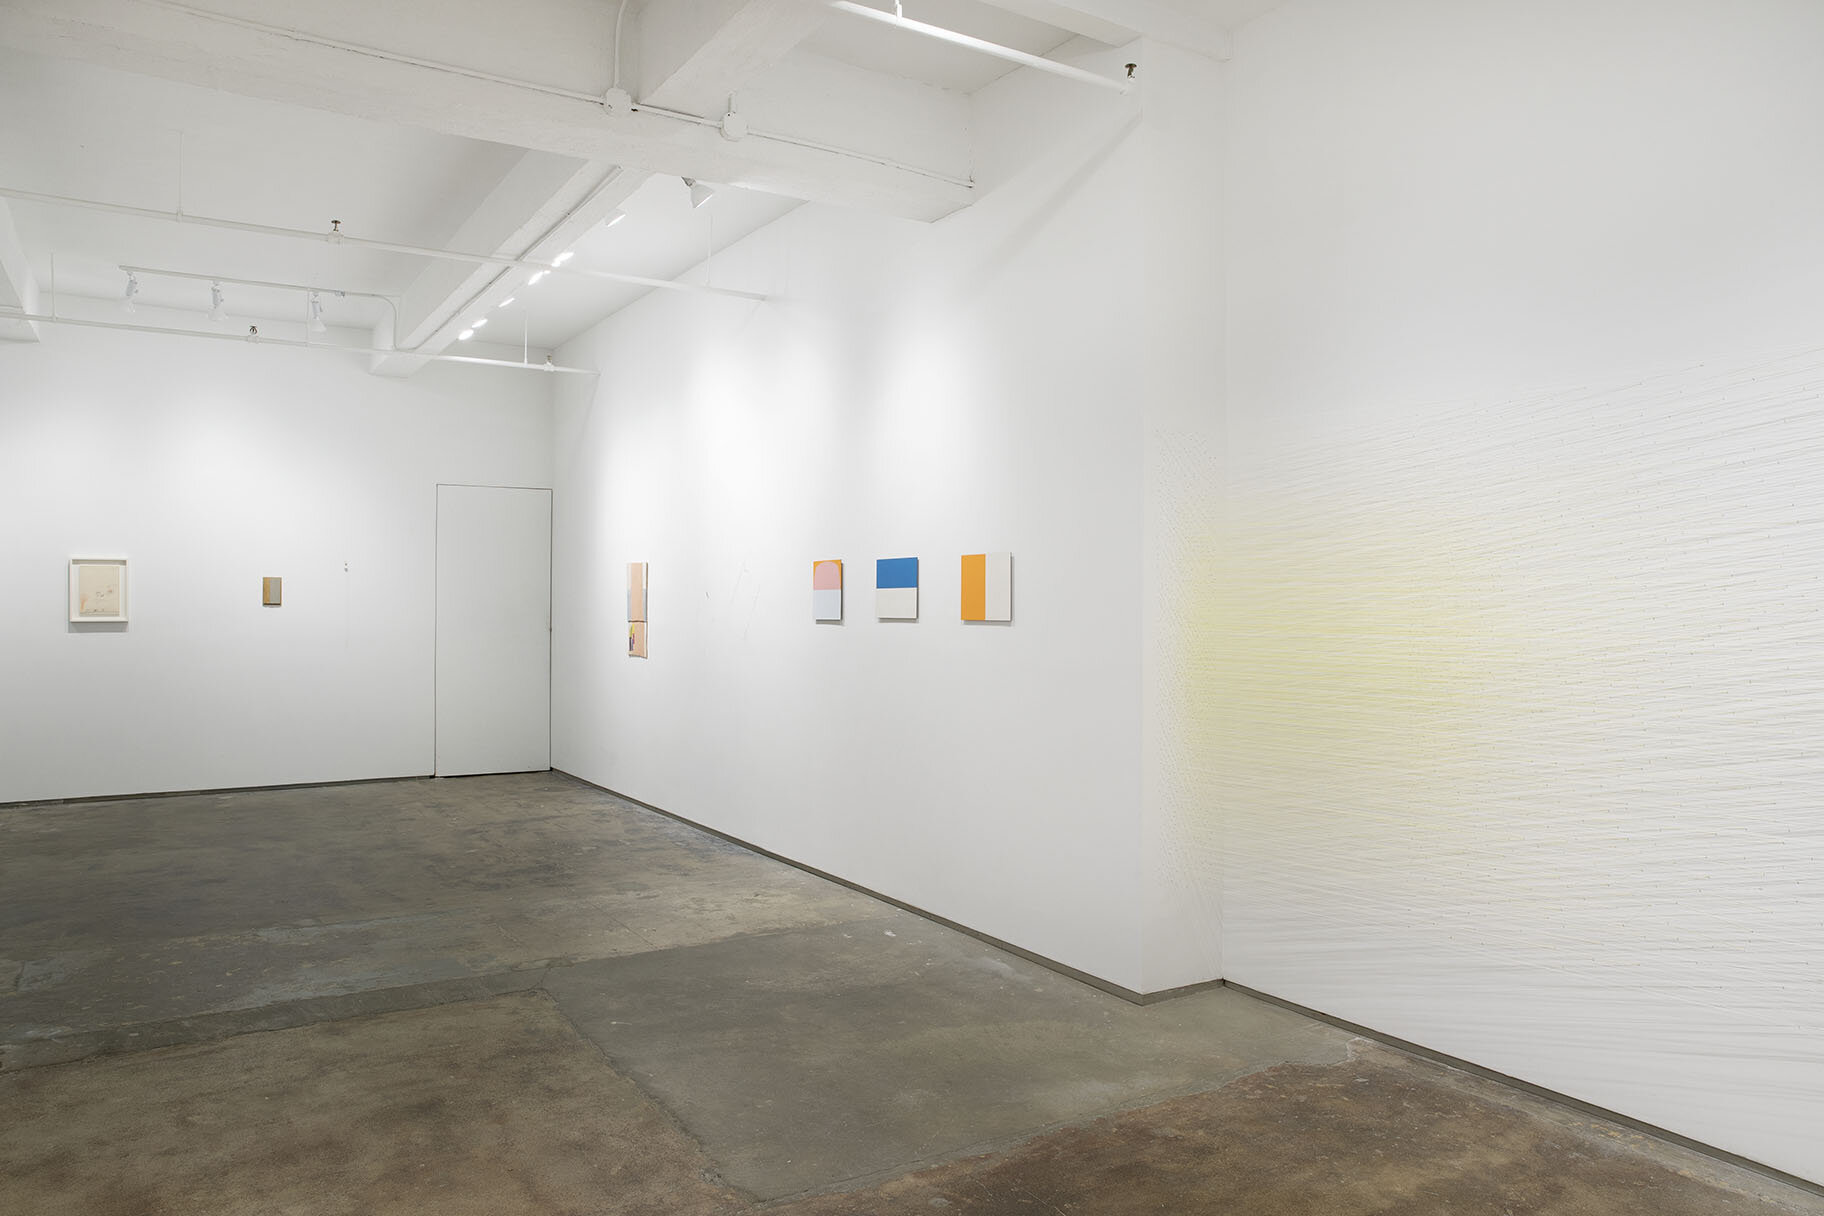   installation view   also pictured: work by Richard Tuttle, Beto De Volder and Cy Twombly  